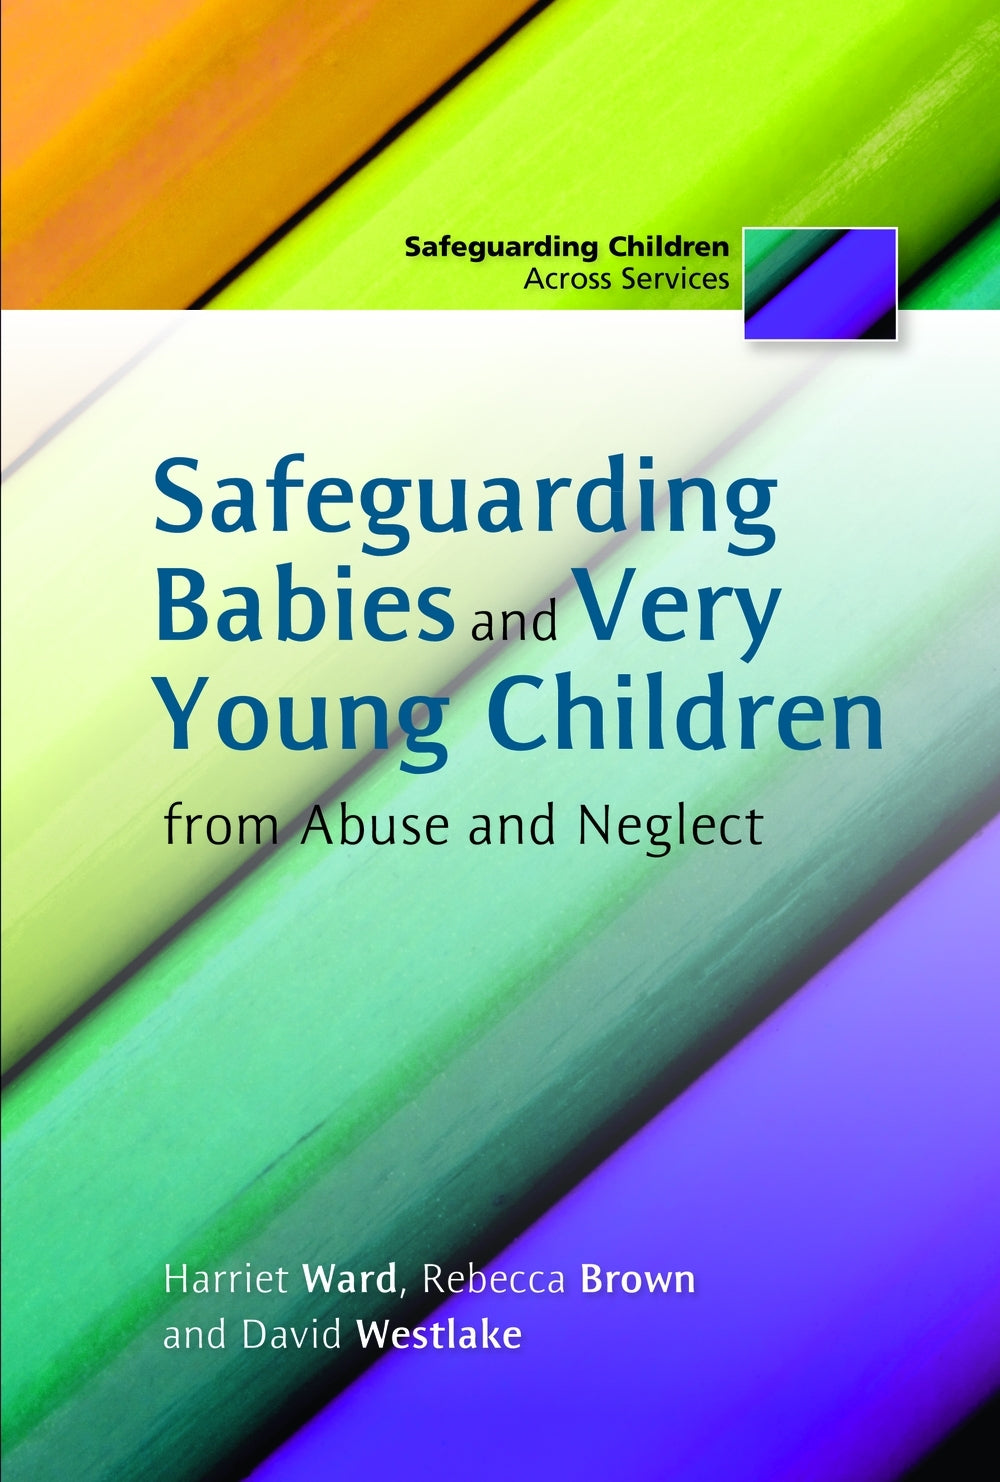 Safeguarding Babies and Very Young Children from Abuse and Neglect by Rebecca Brown, David Westlake, Harriet Ward